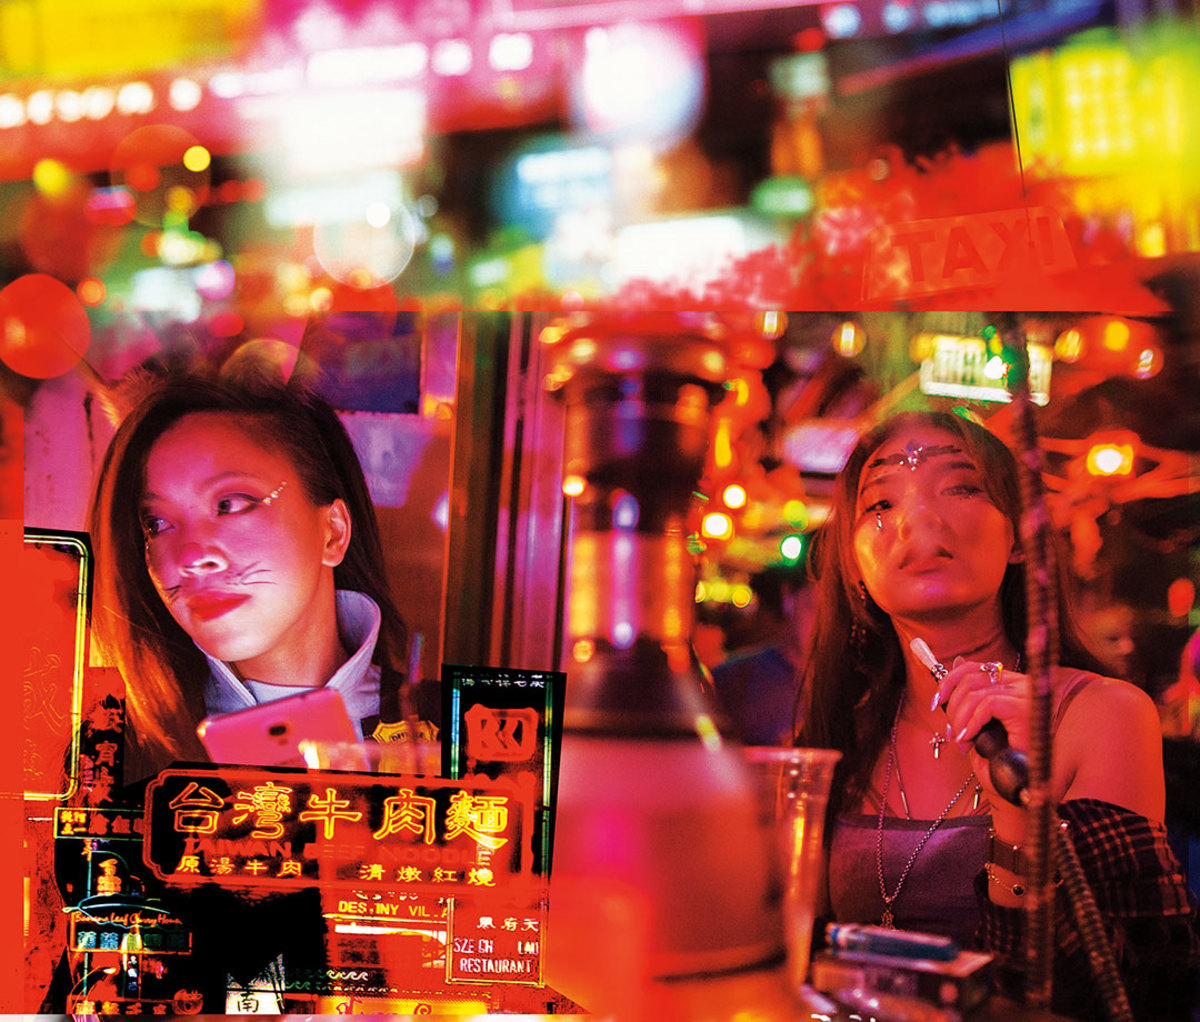 Women smoking at table with neon lights in background 